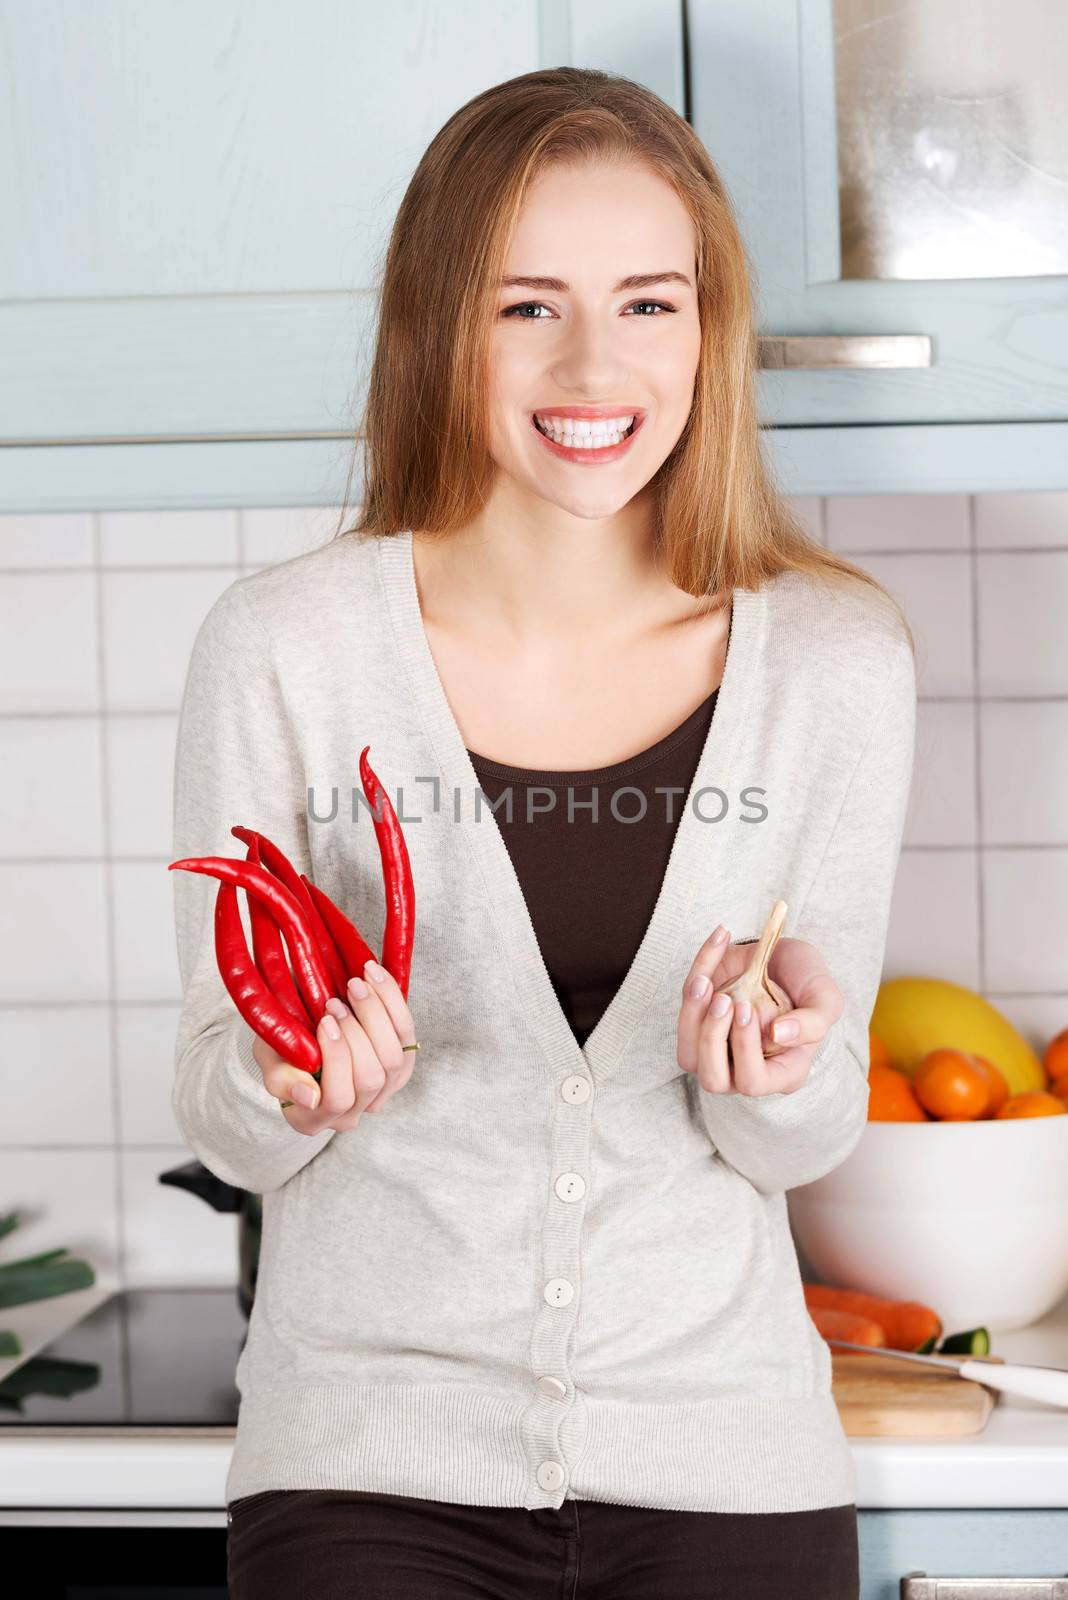 Beautiful caucasian woman is holding chili peppers and garlic. Kitchen background.